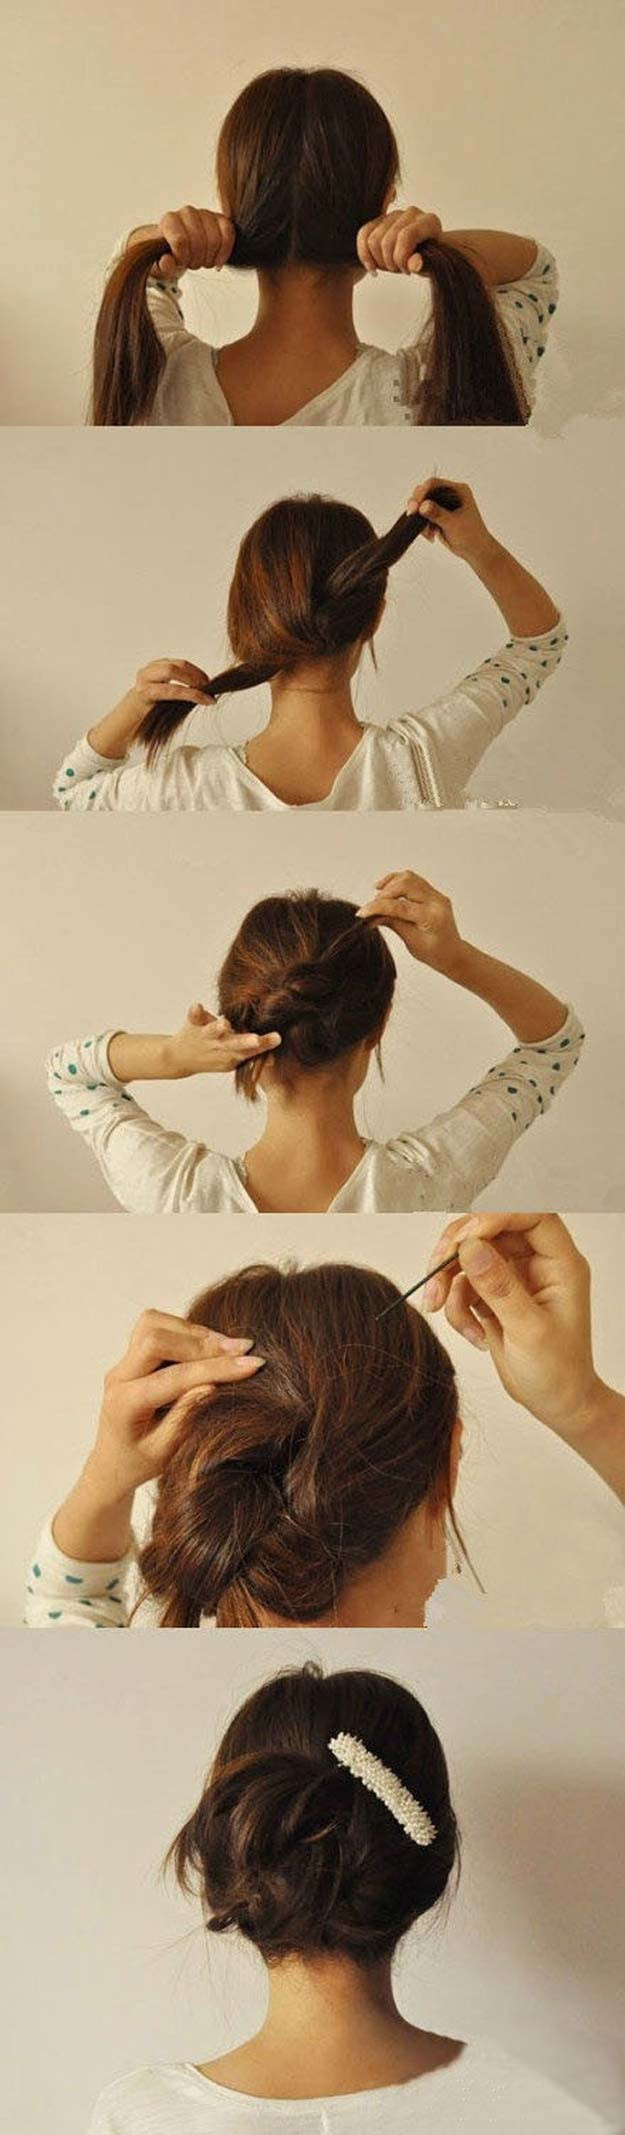 DIY Long Haircut
 36 Best Hairstyles for Long Hair DIY Projects for Teens